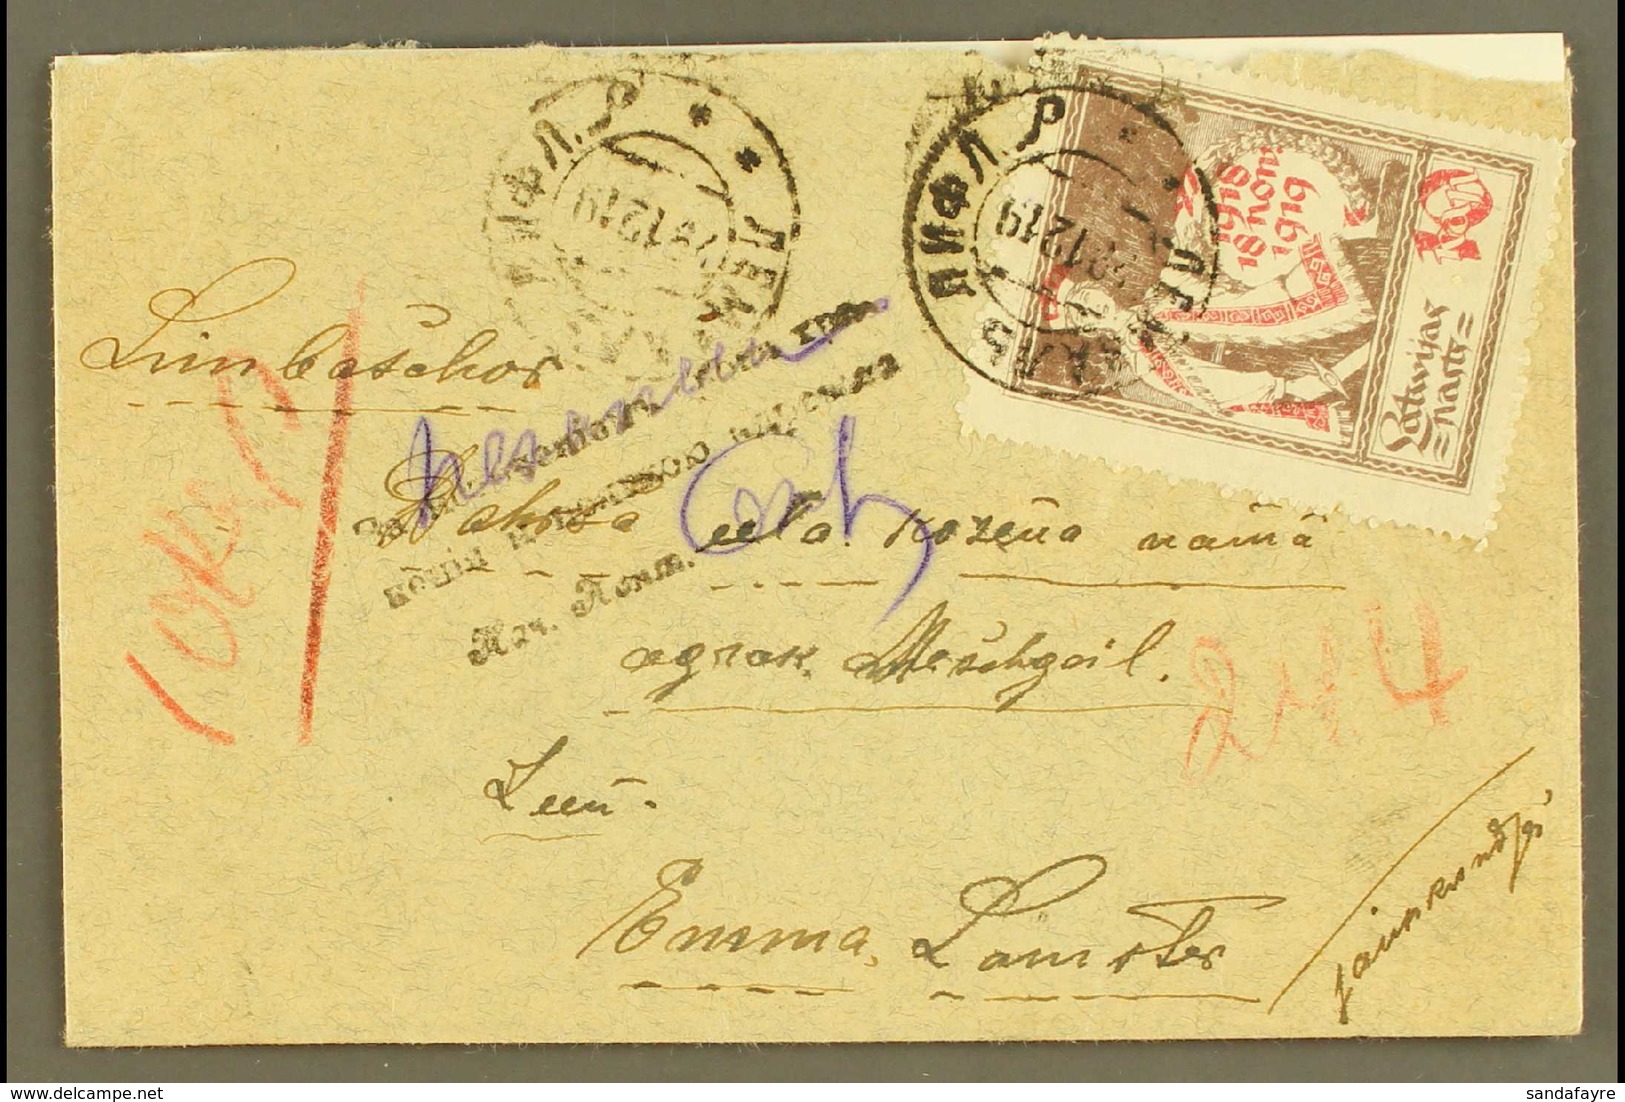 1919 (22 Dec) Env From Lemsal With Some Flap / Opening Faults Bearing 10k Carmine And Brown First Anniversary Stamp, A S - Letland